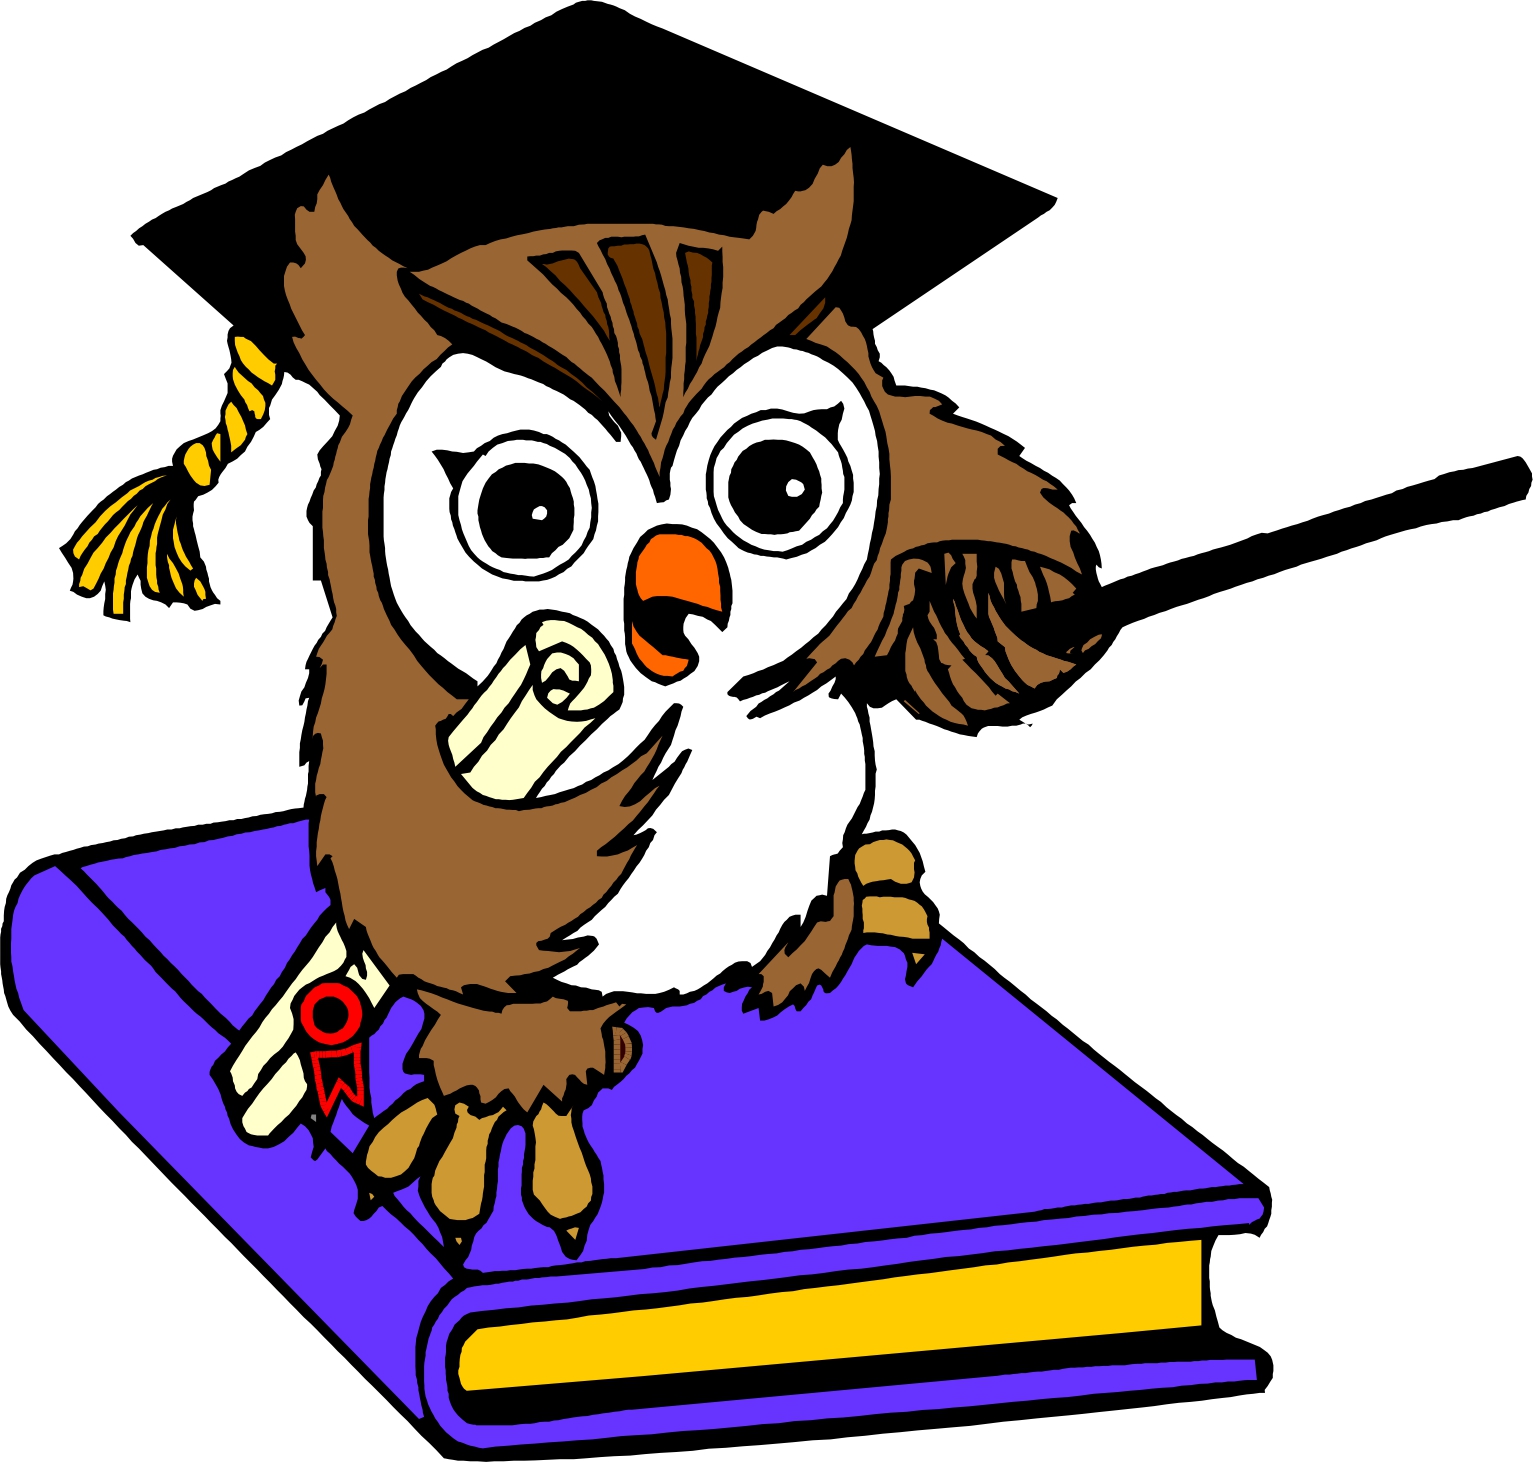 Cartoon Owl Pictures For Kids - ClipArt Best